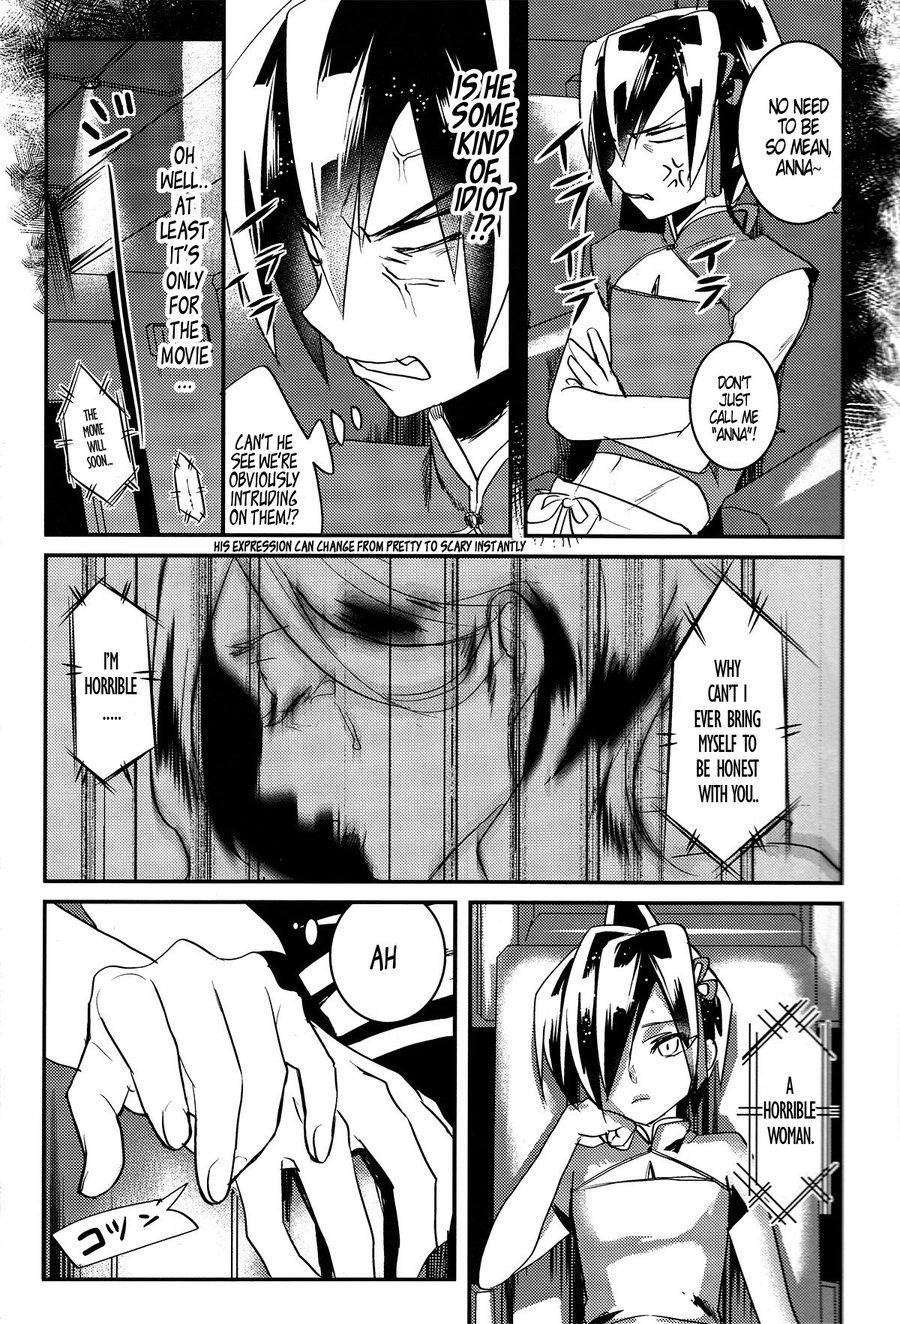 Hot Fuck Lie and Heart - Shaman king Submission - Page 9